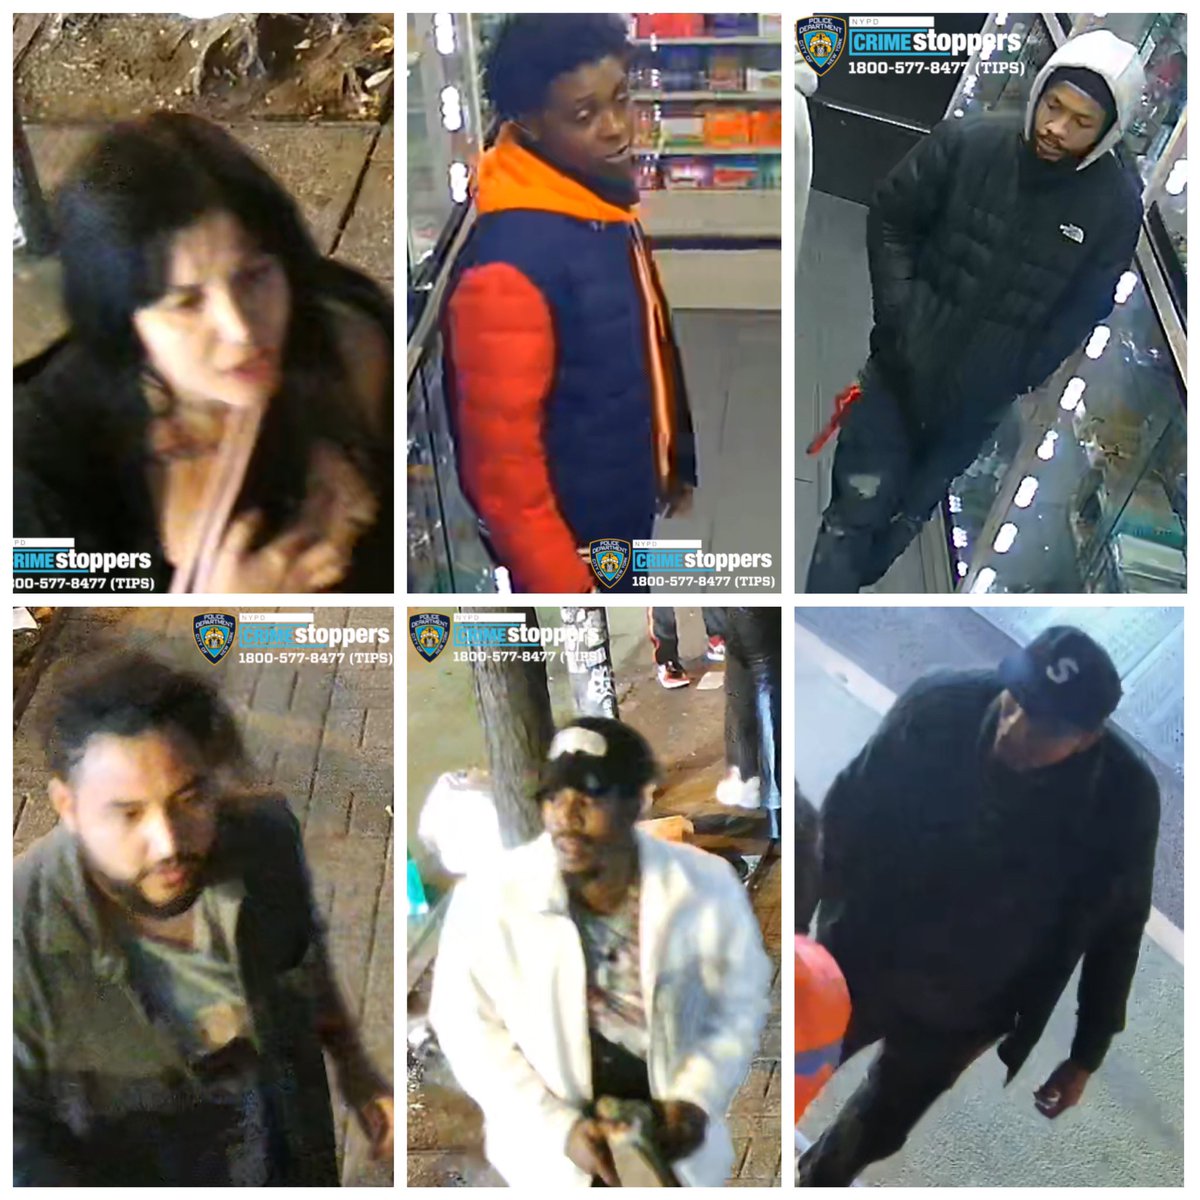 Nypd 7th Precinct On Twitter Wanted For Robbery Oct 29th At Approx